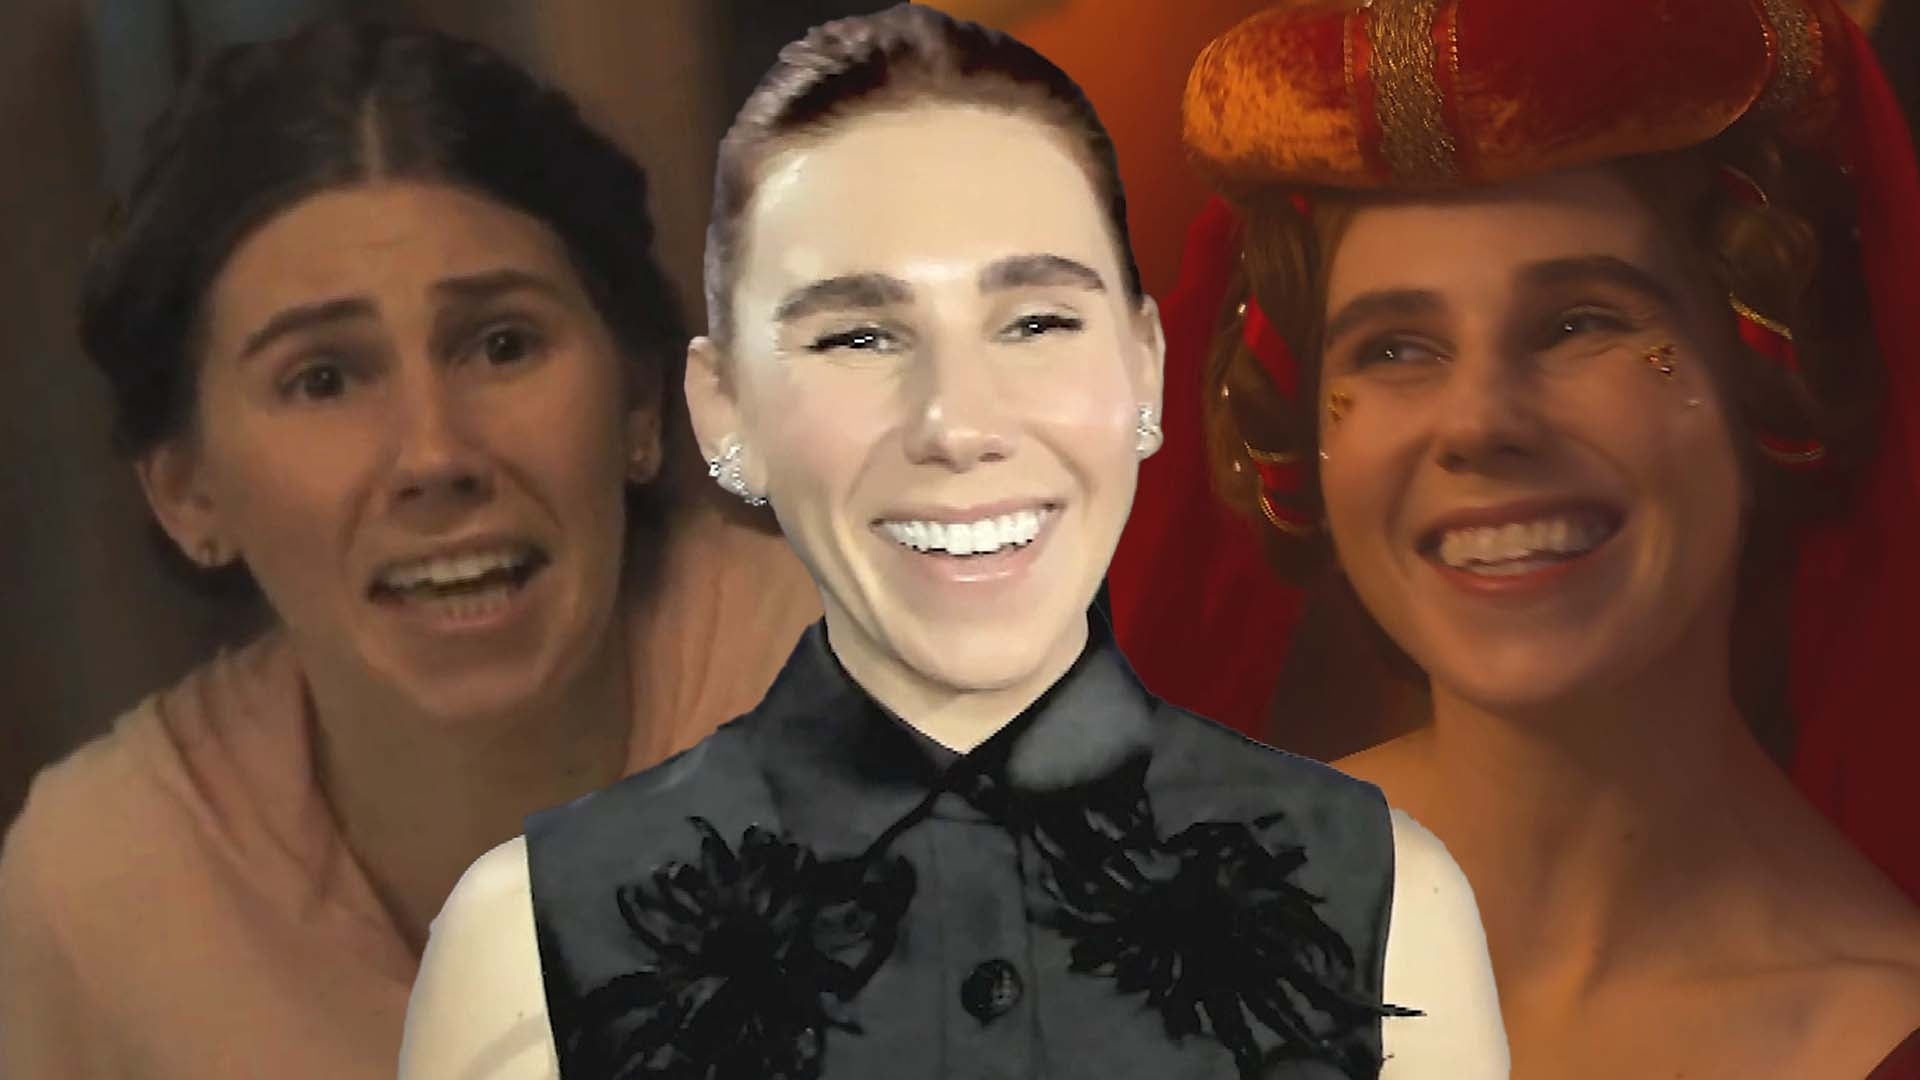 Zosia Mamet on Who'd Win in a 'Girls' vs. 'The Decameron' Character Showdown